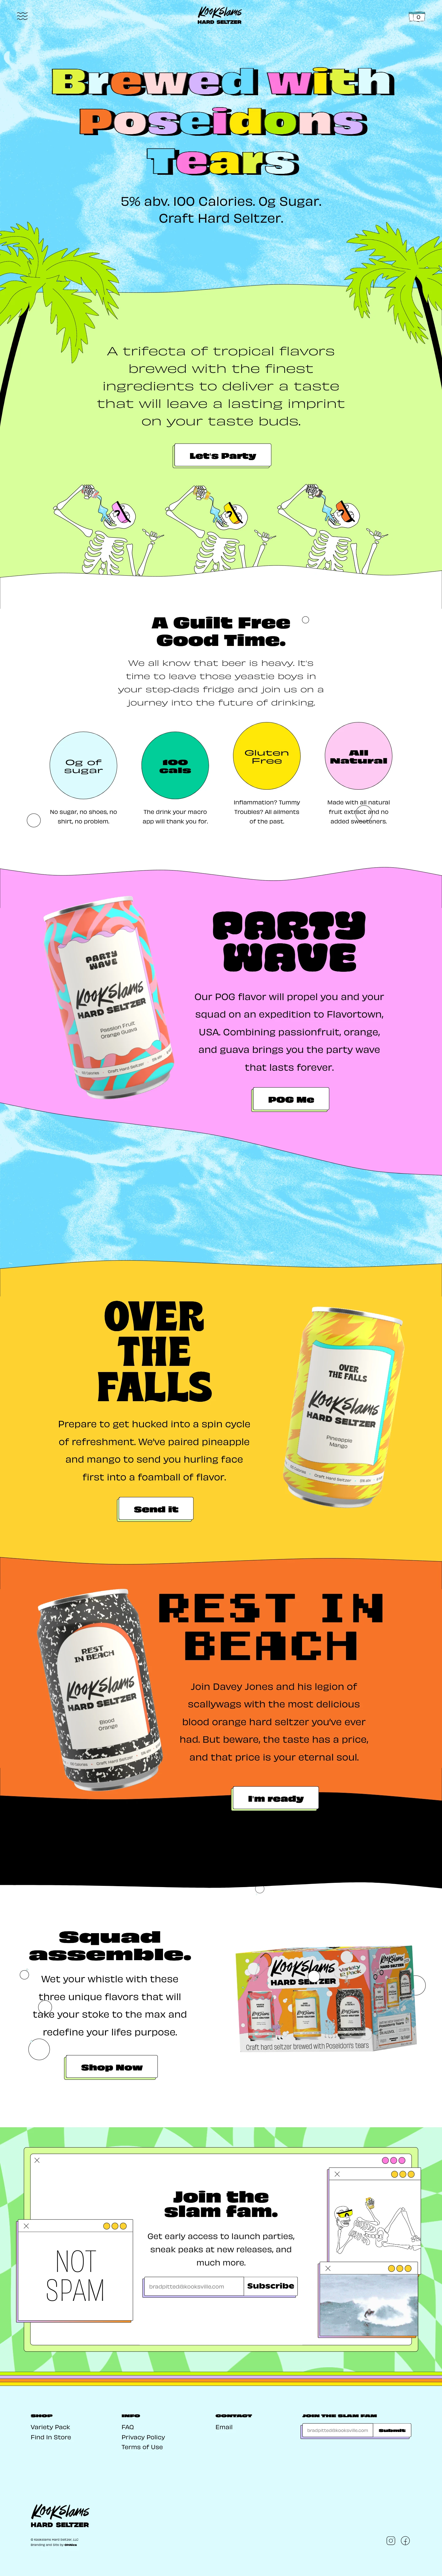 Kookslams Hard Seltzer Landing Page Example: A trifecta of tropical flavors brewed with the finest ingredients to deliver a taste that will leave a lasting imprint on your taste buds.